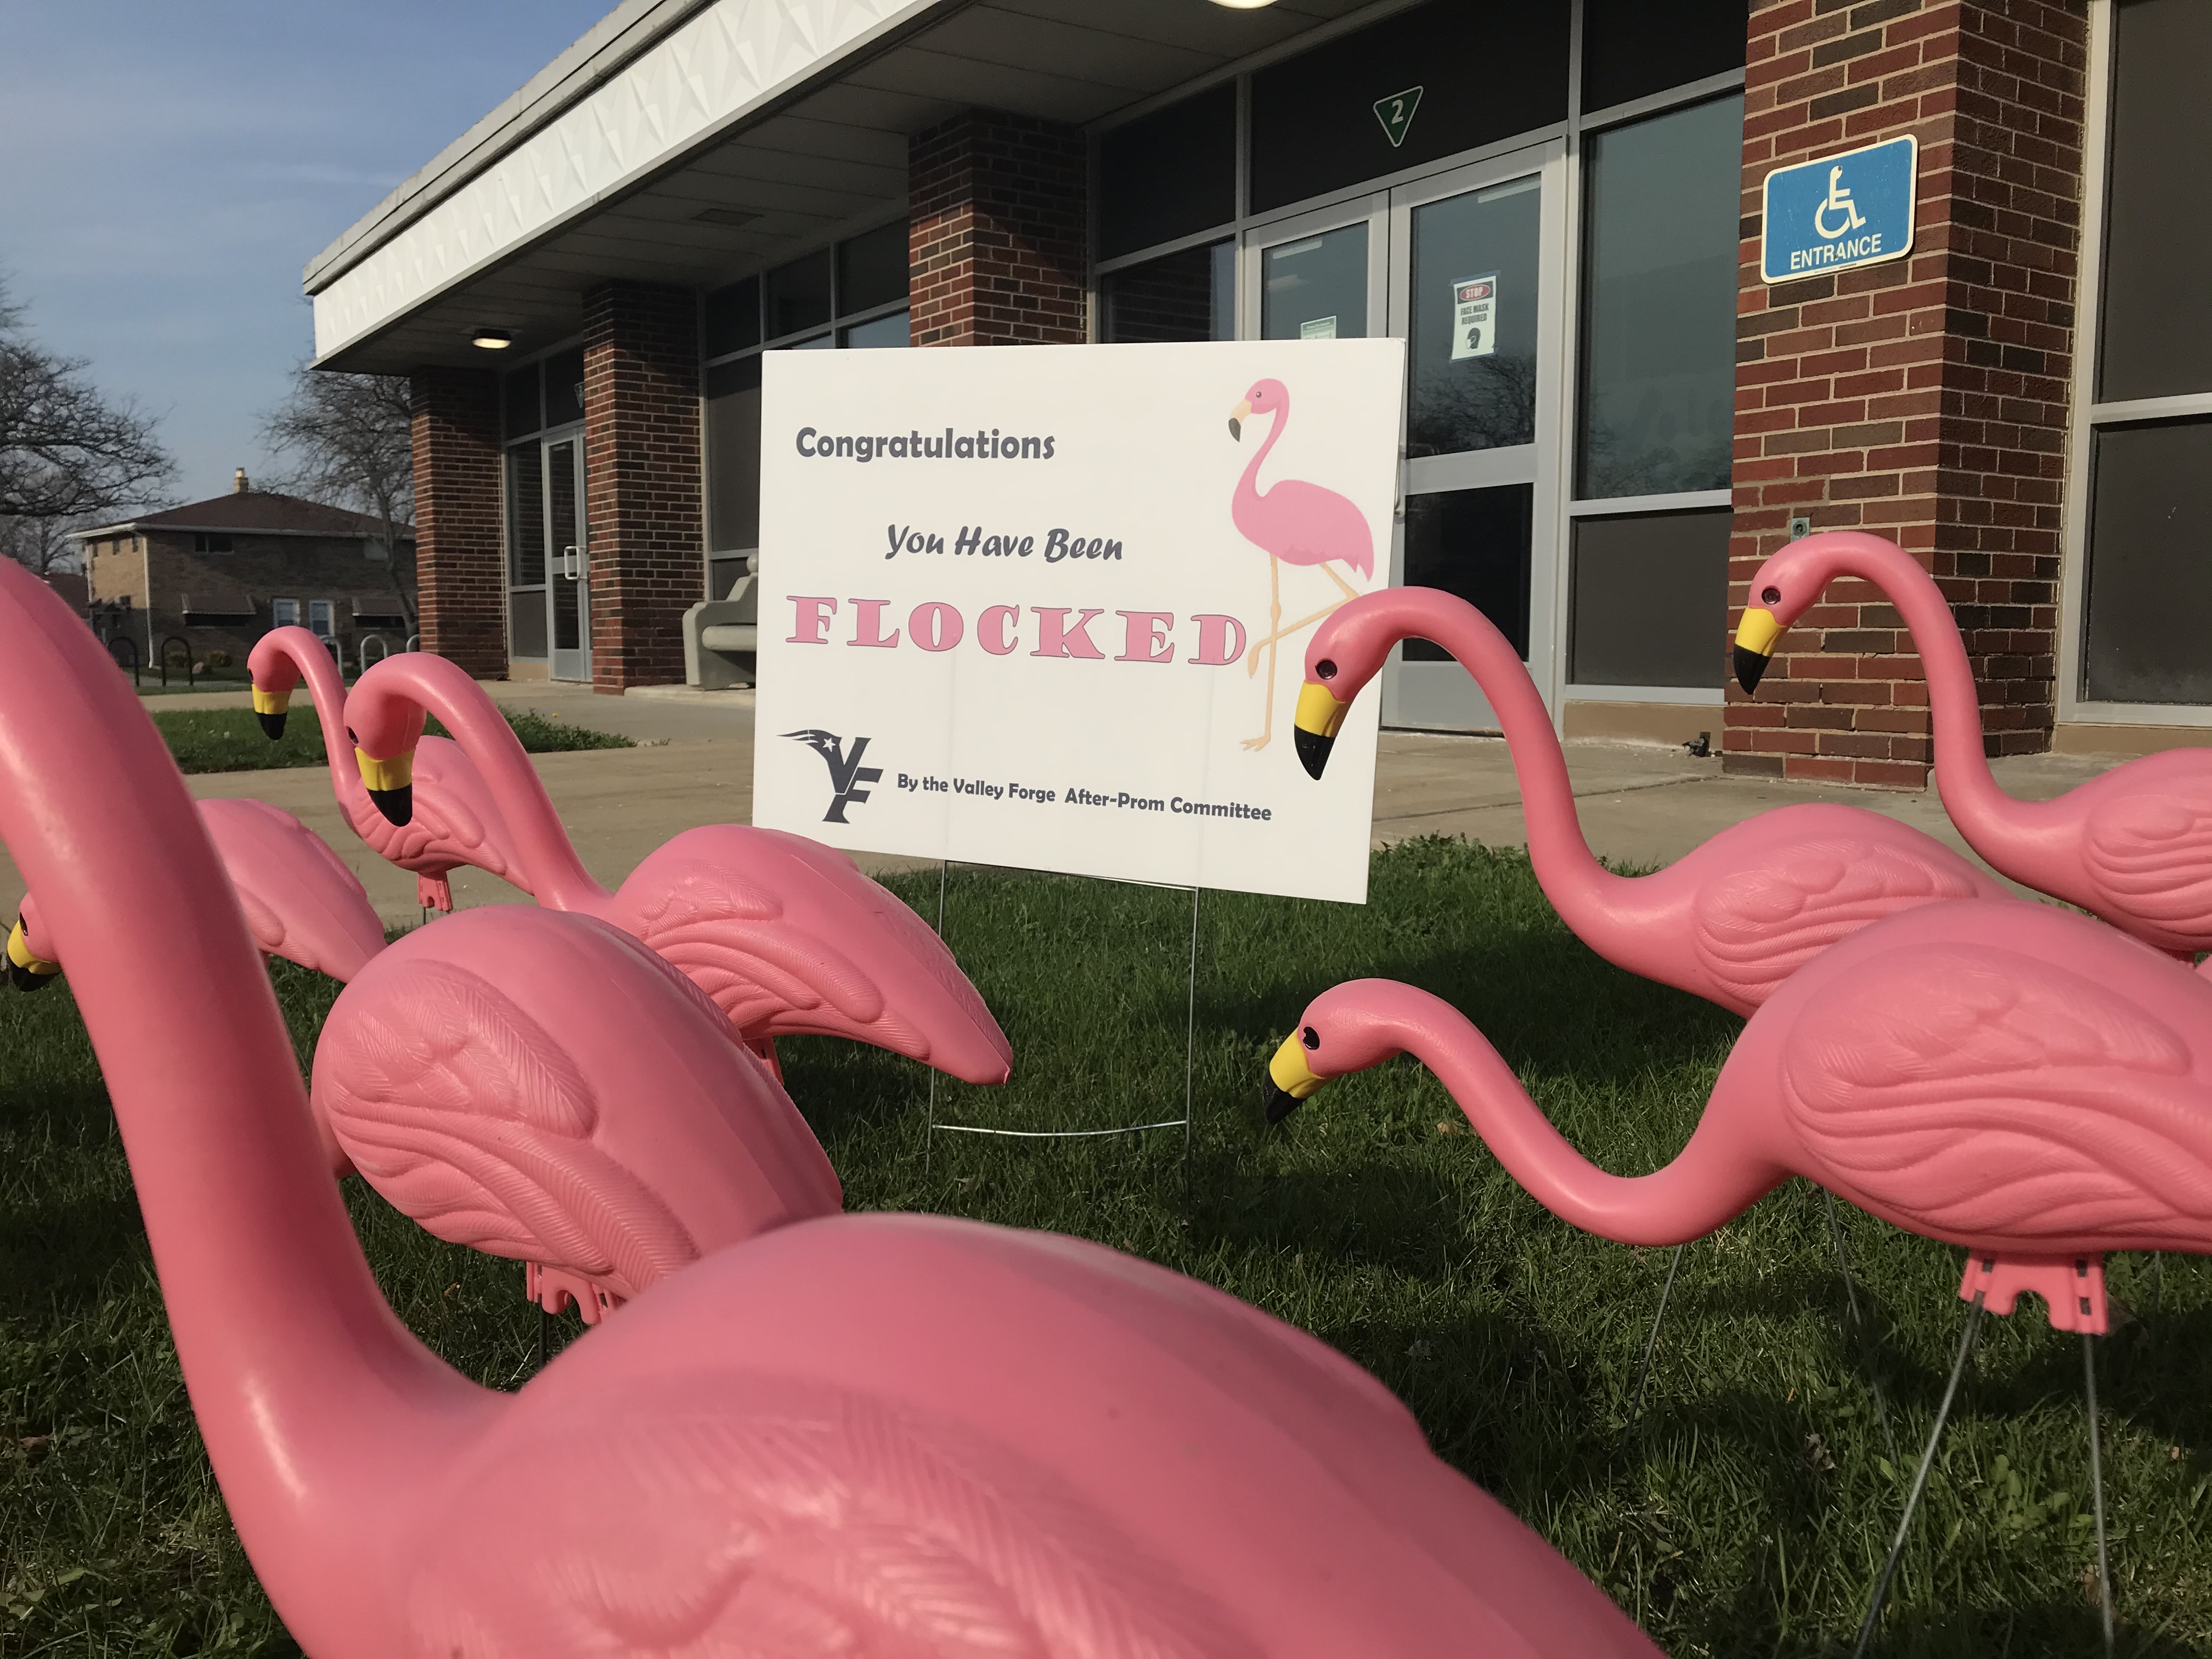 7 Reasons Why Pink Flamingos Are Absolutely Fabulous - Owlcation